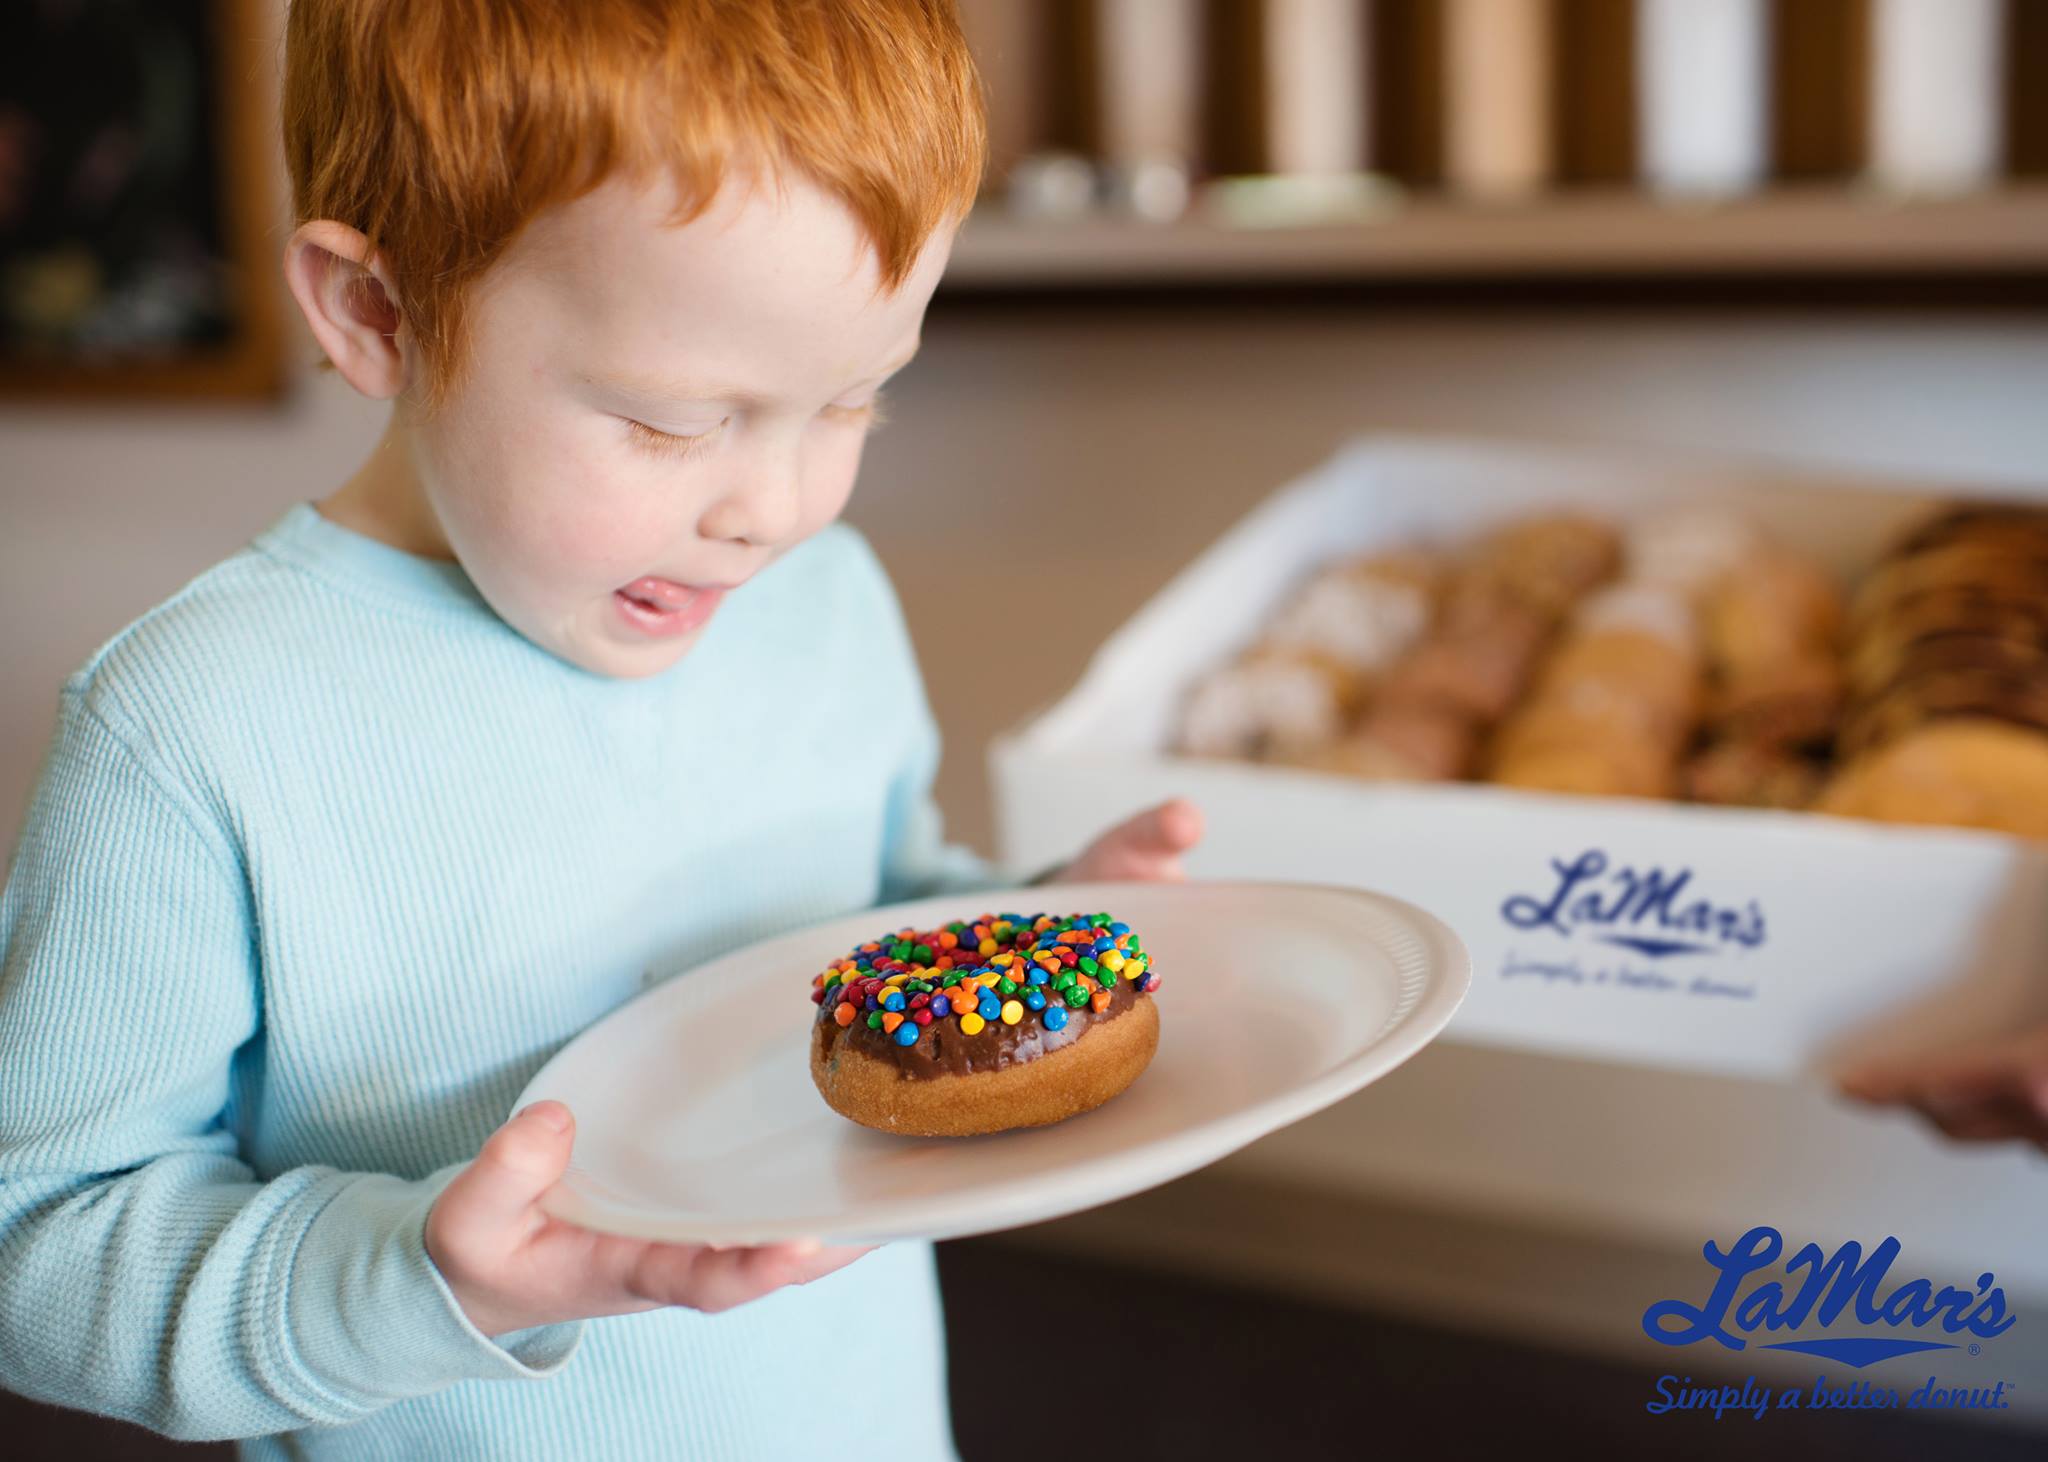 2018 national doughnut day freebies – child with lamar's donut